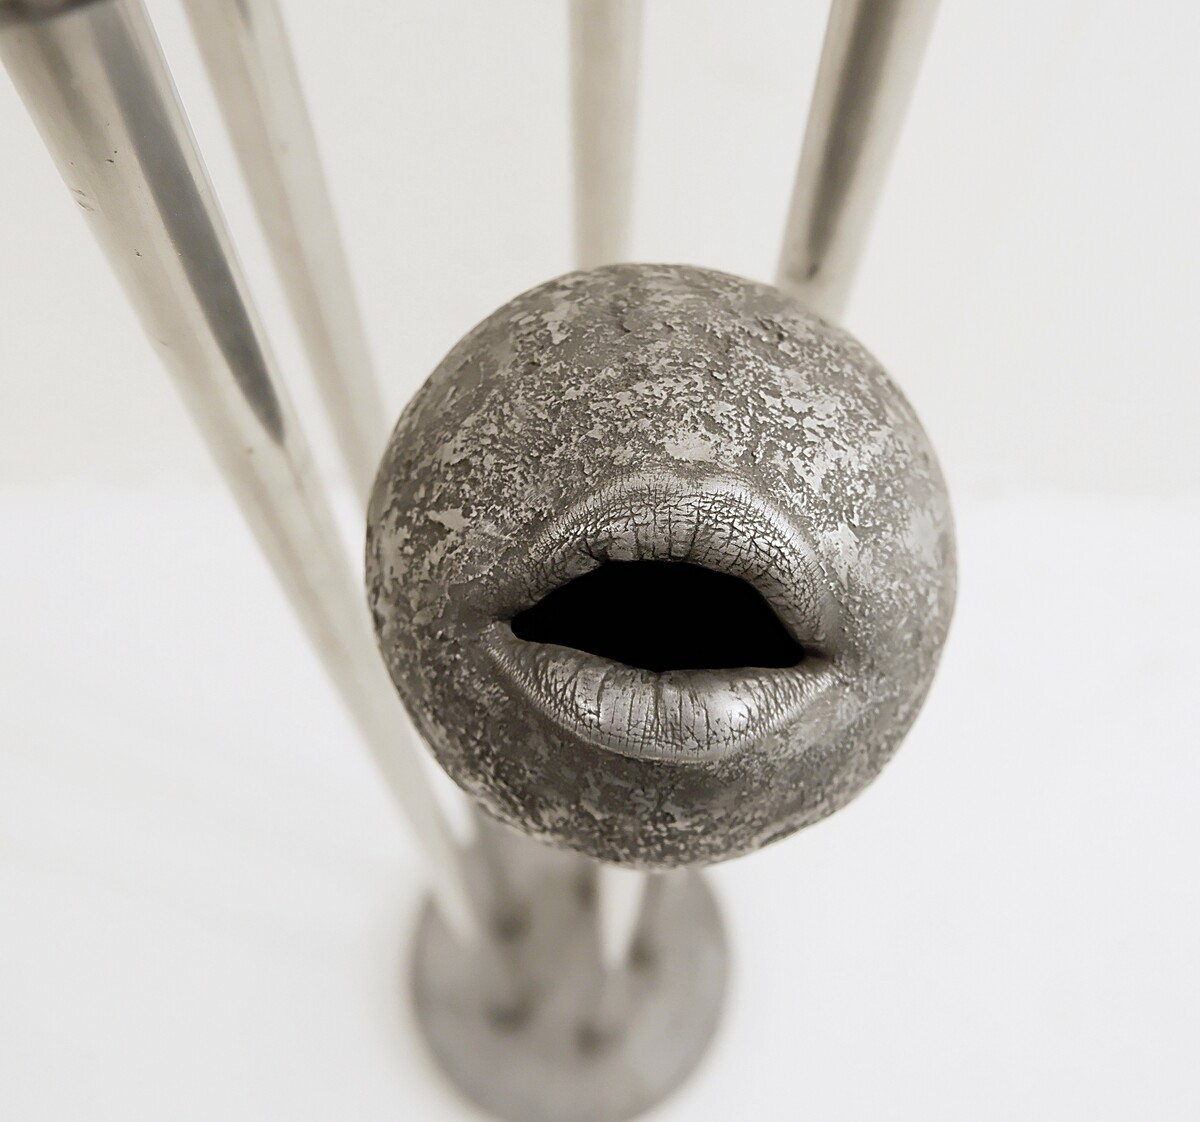 Abstract Lips Metal Sculpture by John Cotter, signed on the base 